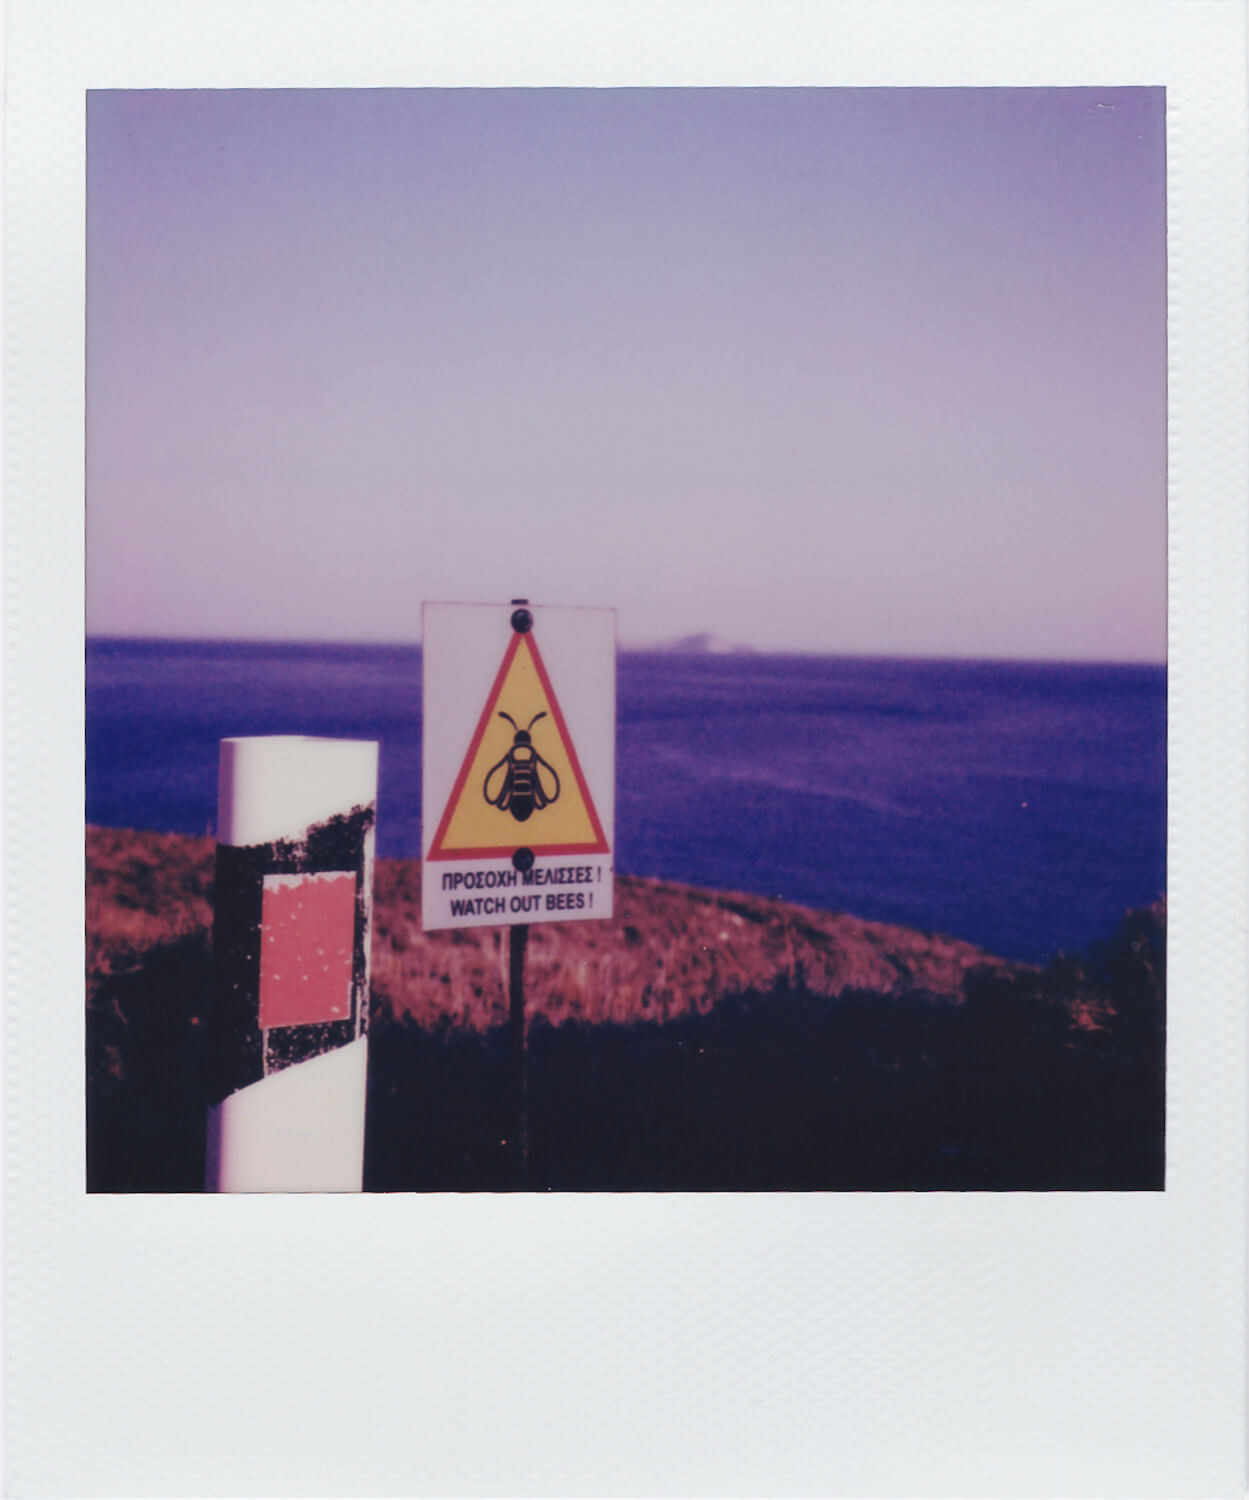 5 Frames... Of Polaroid Color SX-70 Film at the tiny Greek island of Anafi (ISO 160 / Polaroid SX-70 + 116mm f/8 lens) - by George Pavlopoulos